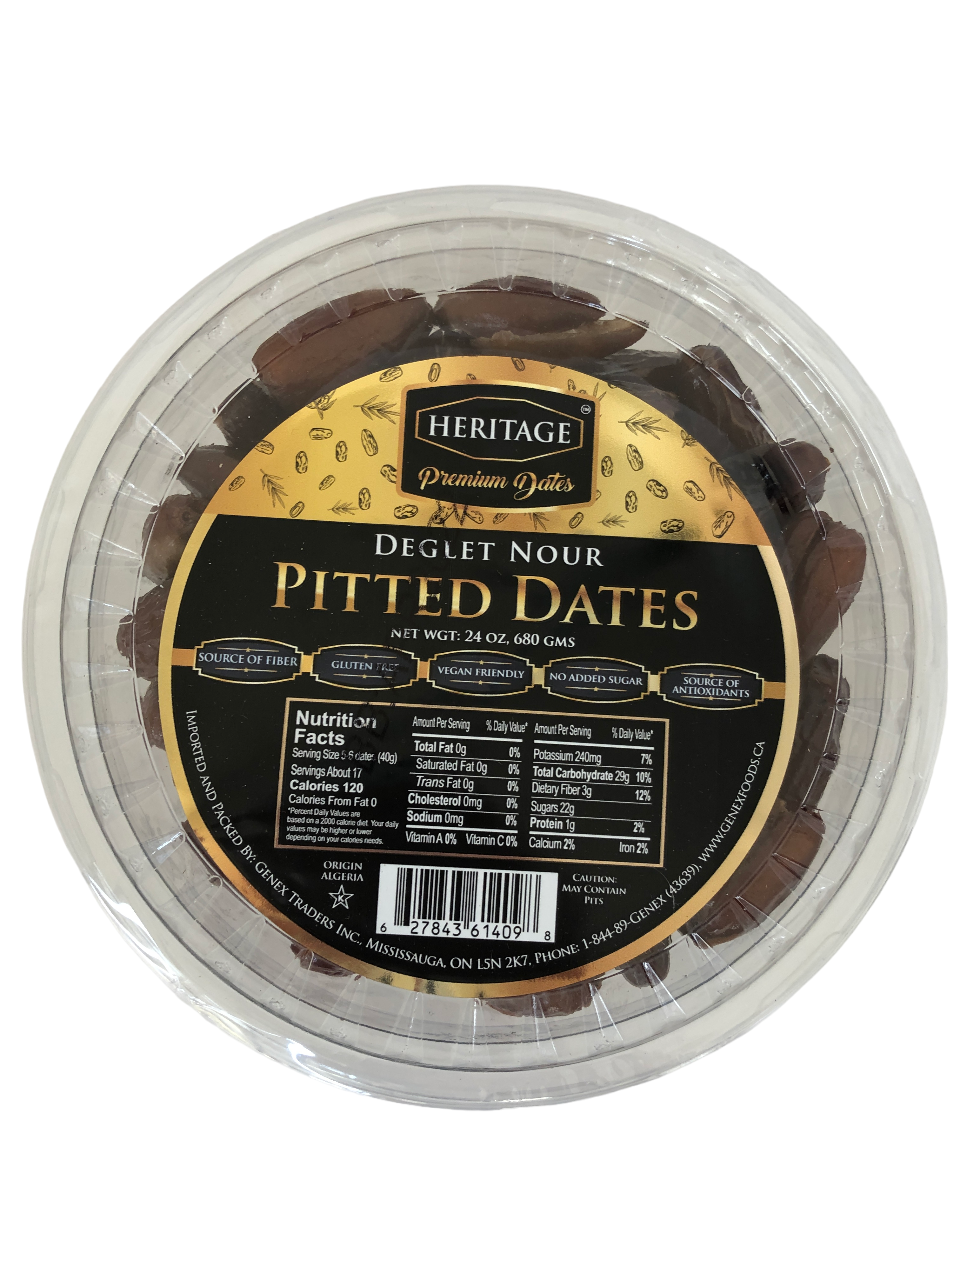 HERITAGE PITTED DEGLET NOUR DATES 24oz